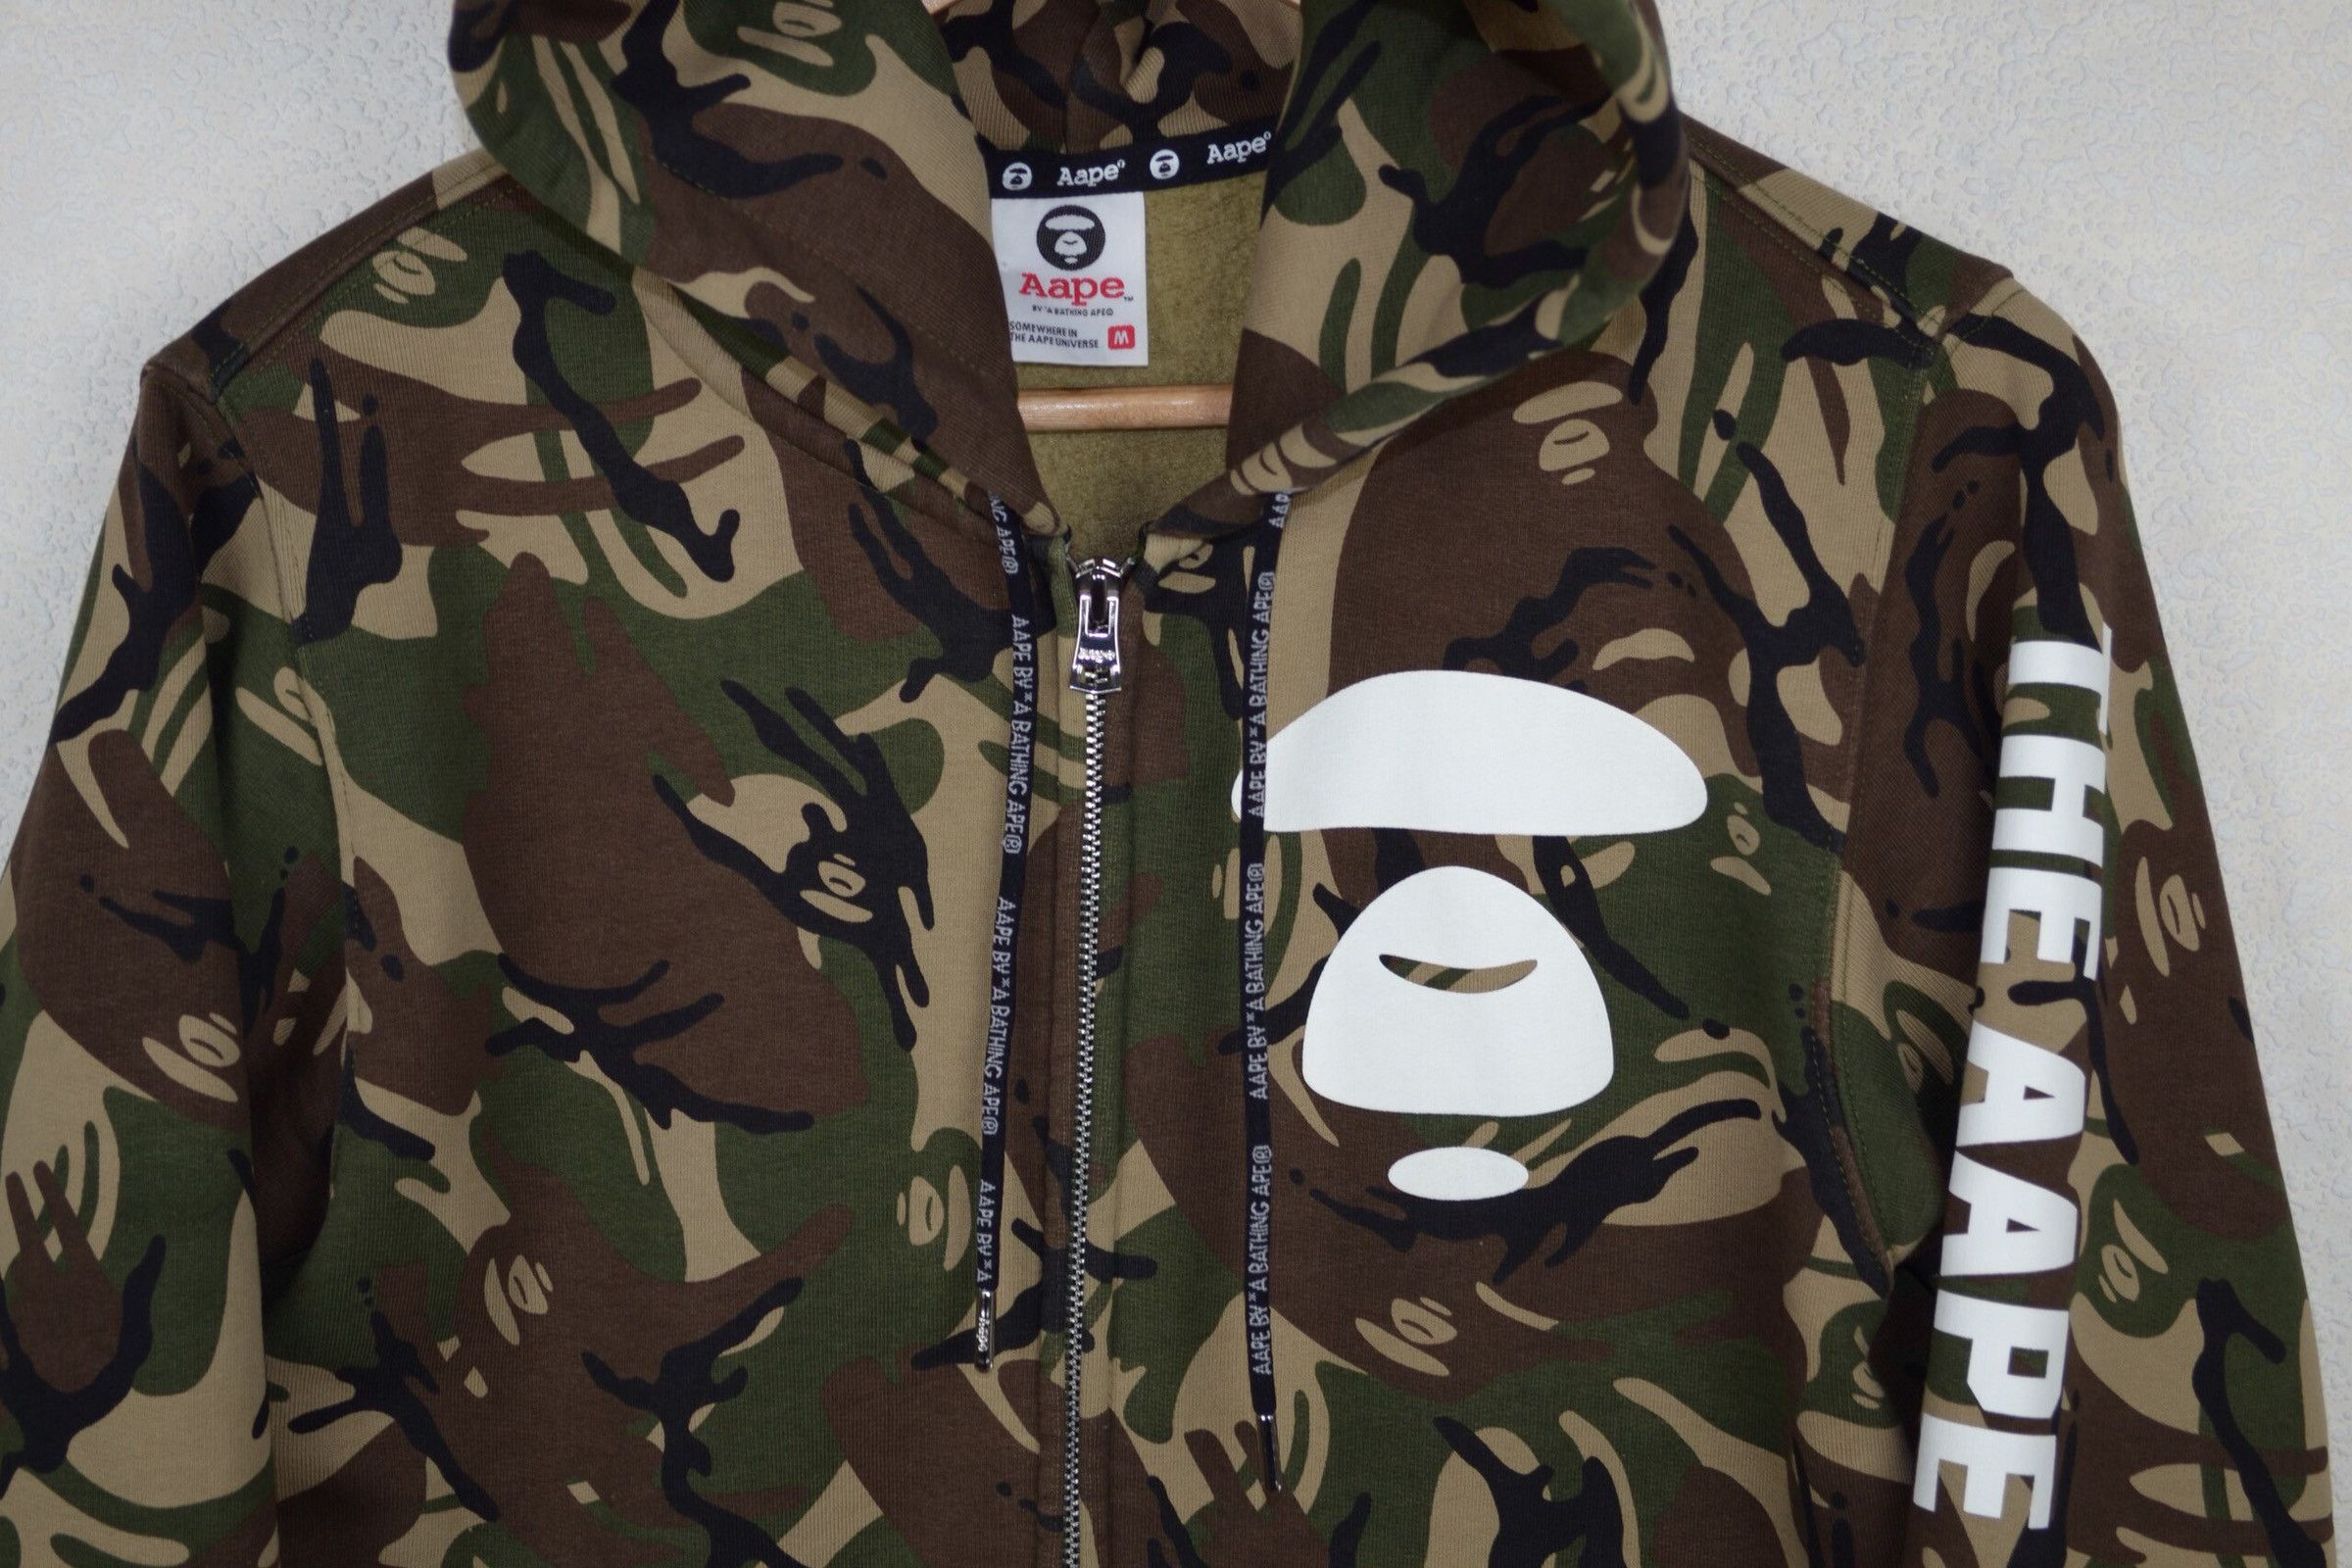 Bape Aape A Bathing Ape Camouflage Full Zip Hoodie Size US M / EU 48-50 / 2 - 2 Preview